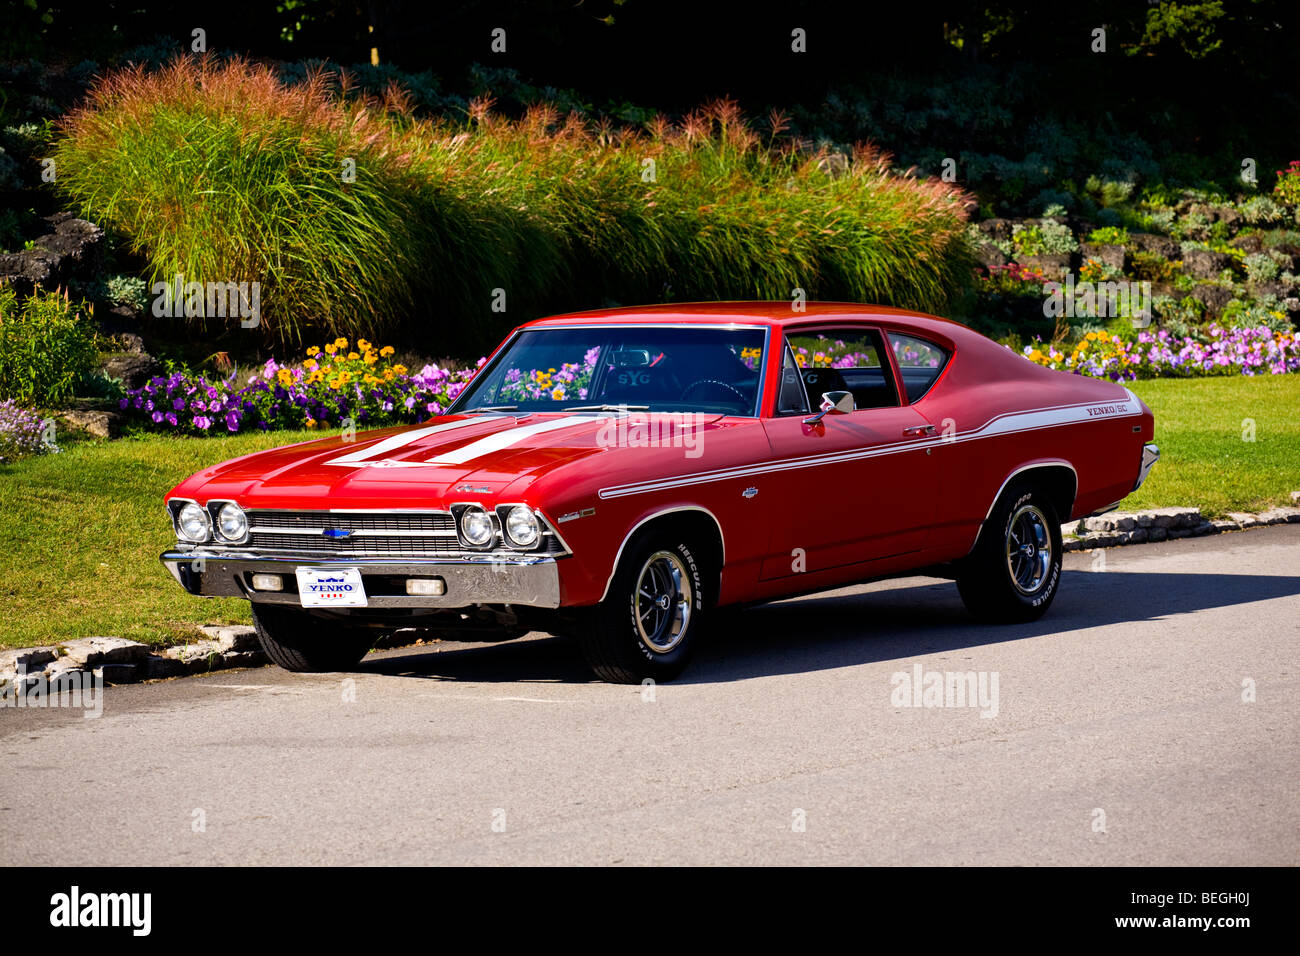 1969 Chevrolet Chevelle Muscle Car on Pavement Stock Photo